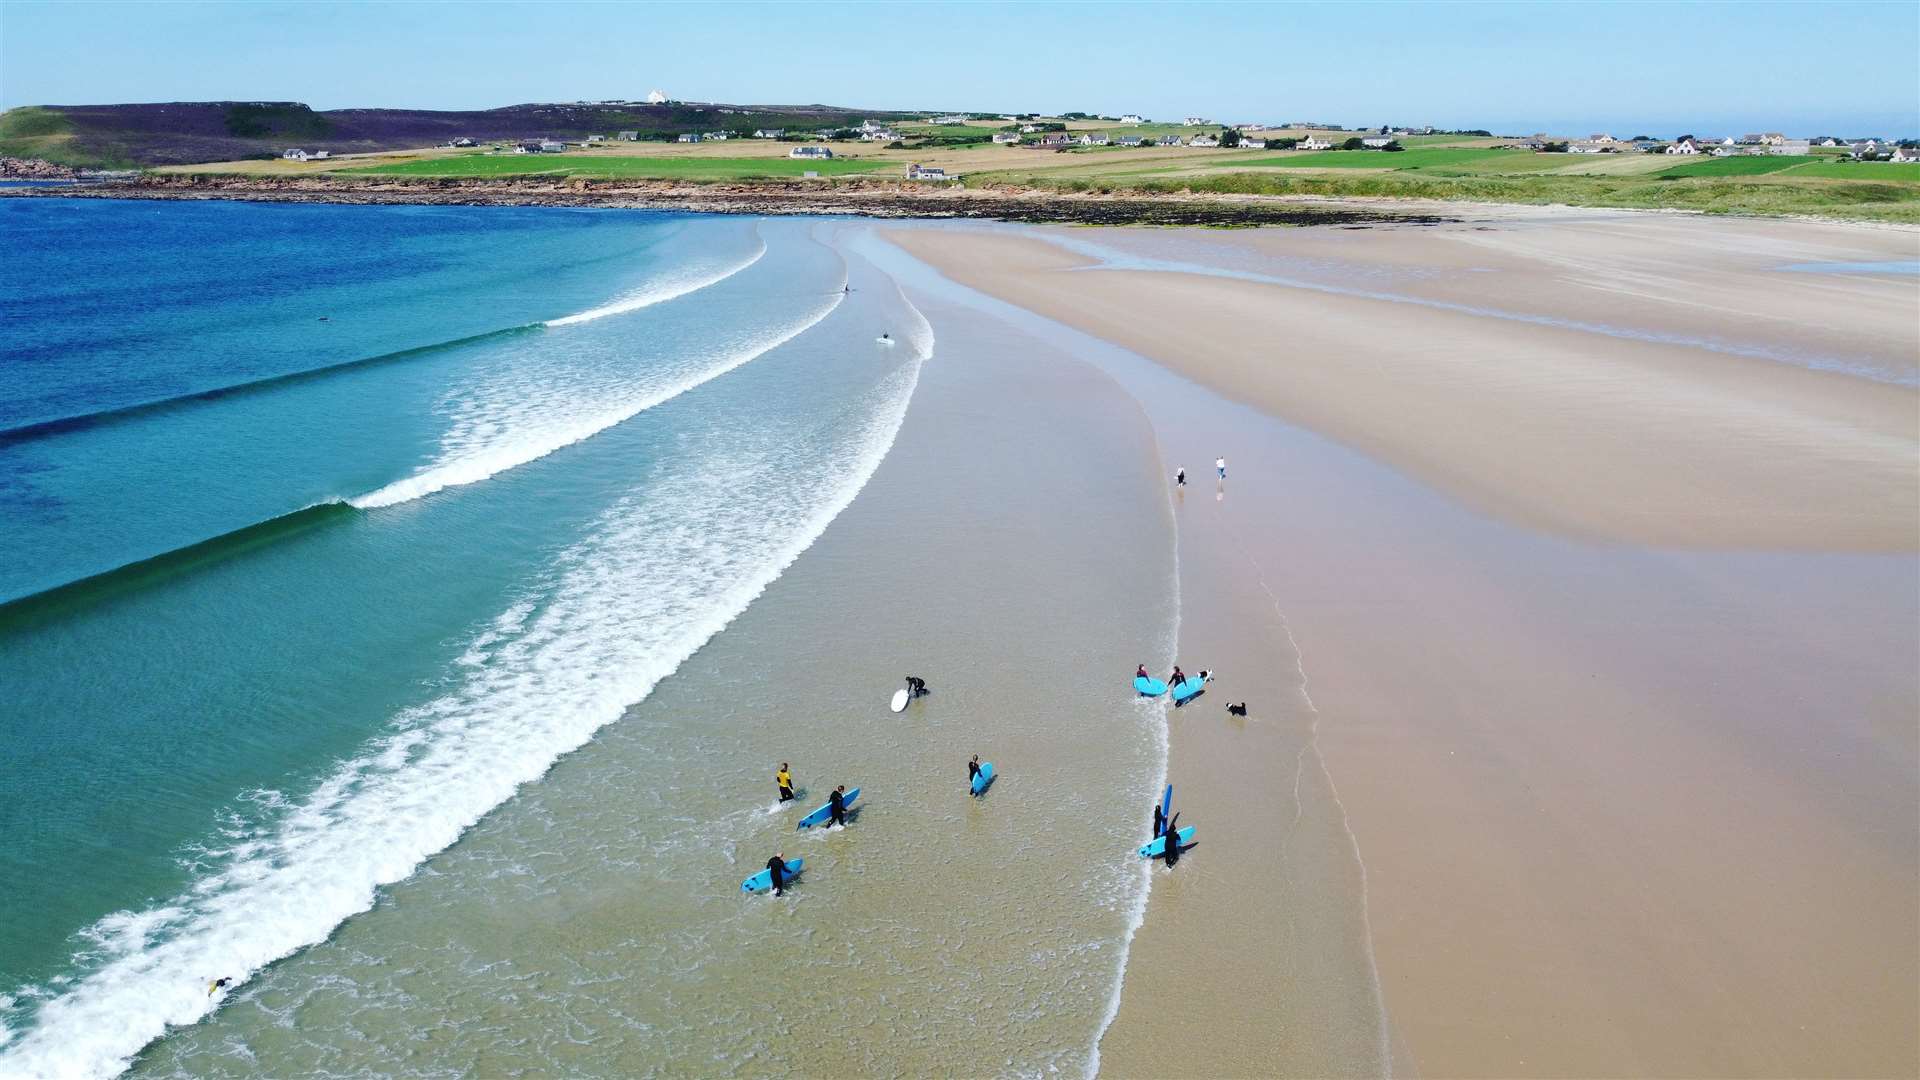 North Coast Watersports offers surf lessons from Thurso.